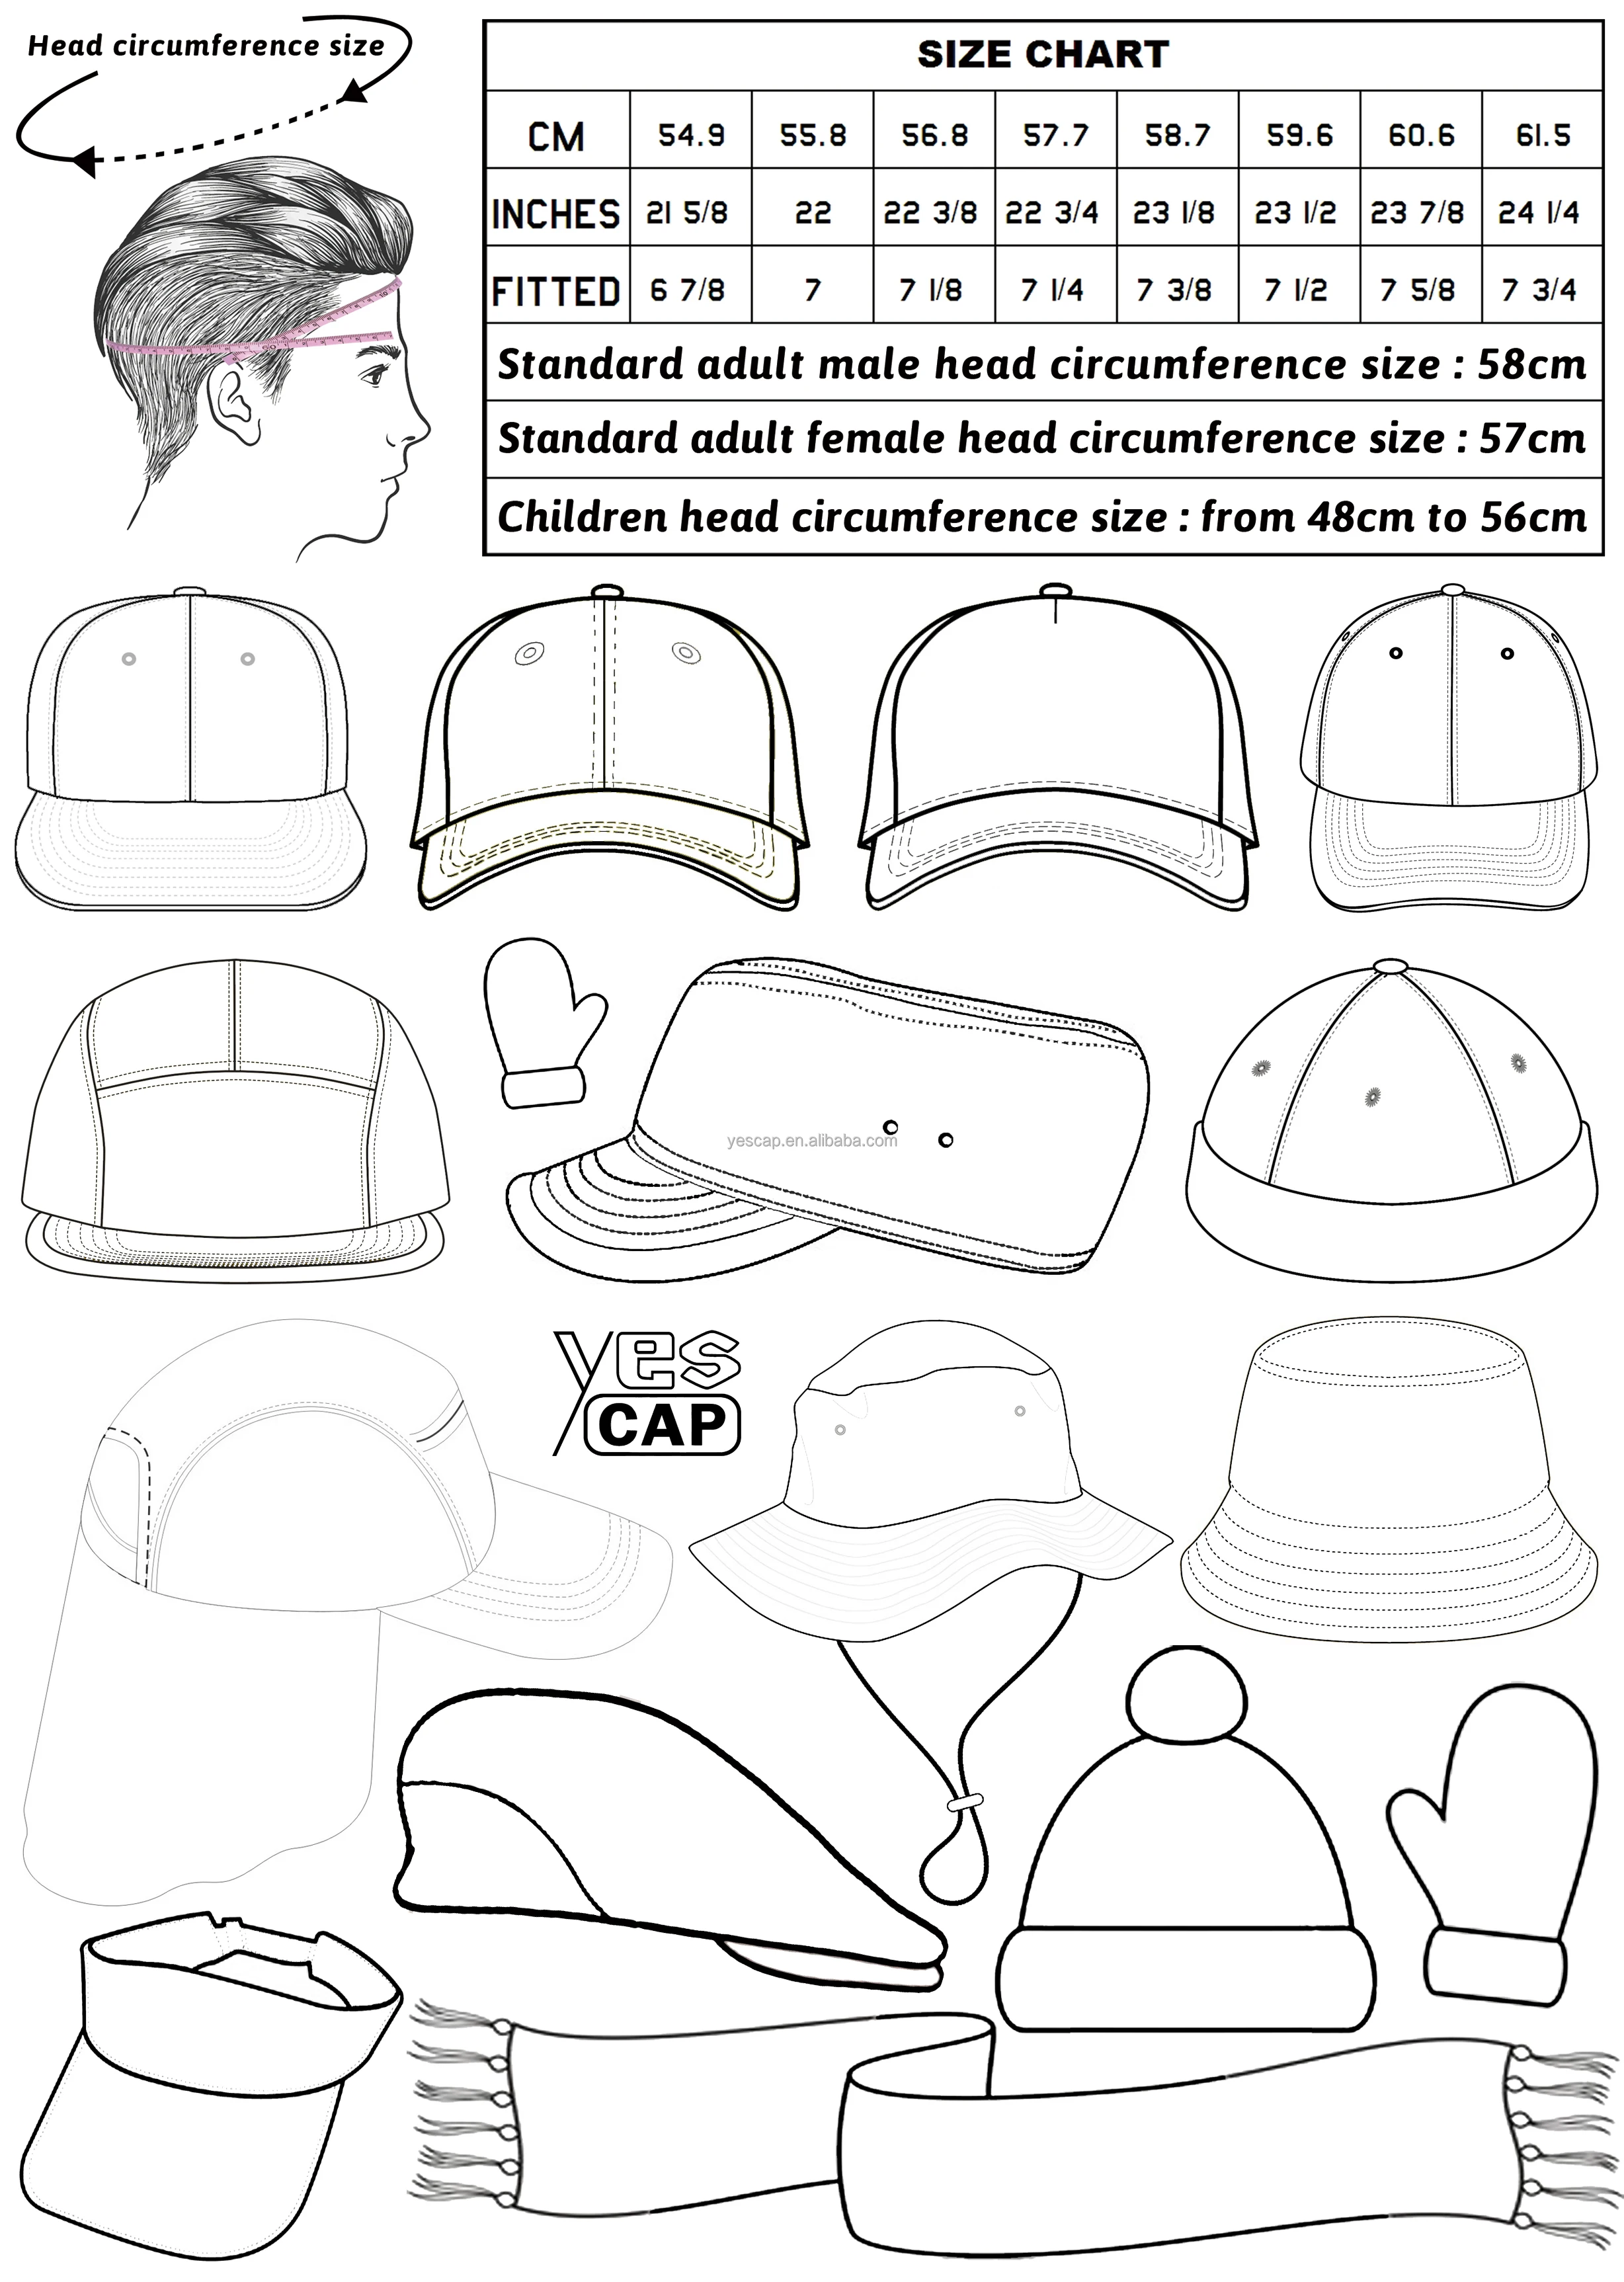 A8-Hats size and Shape